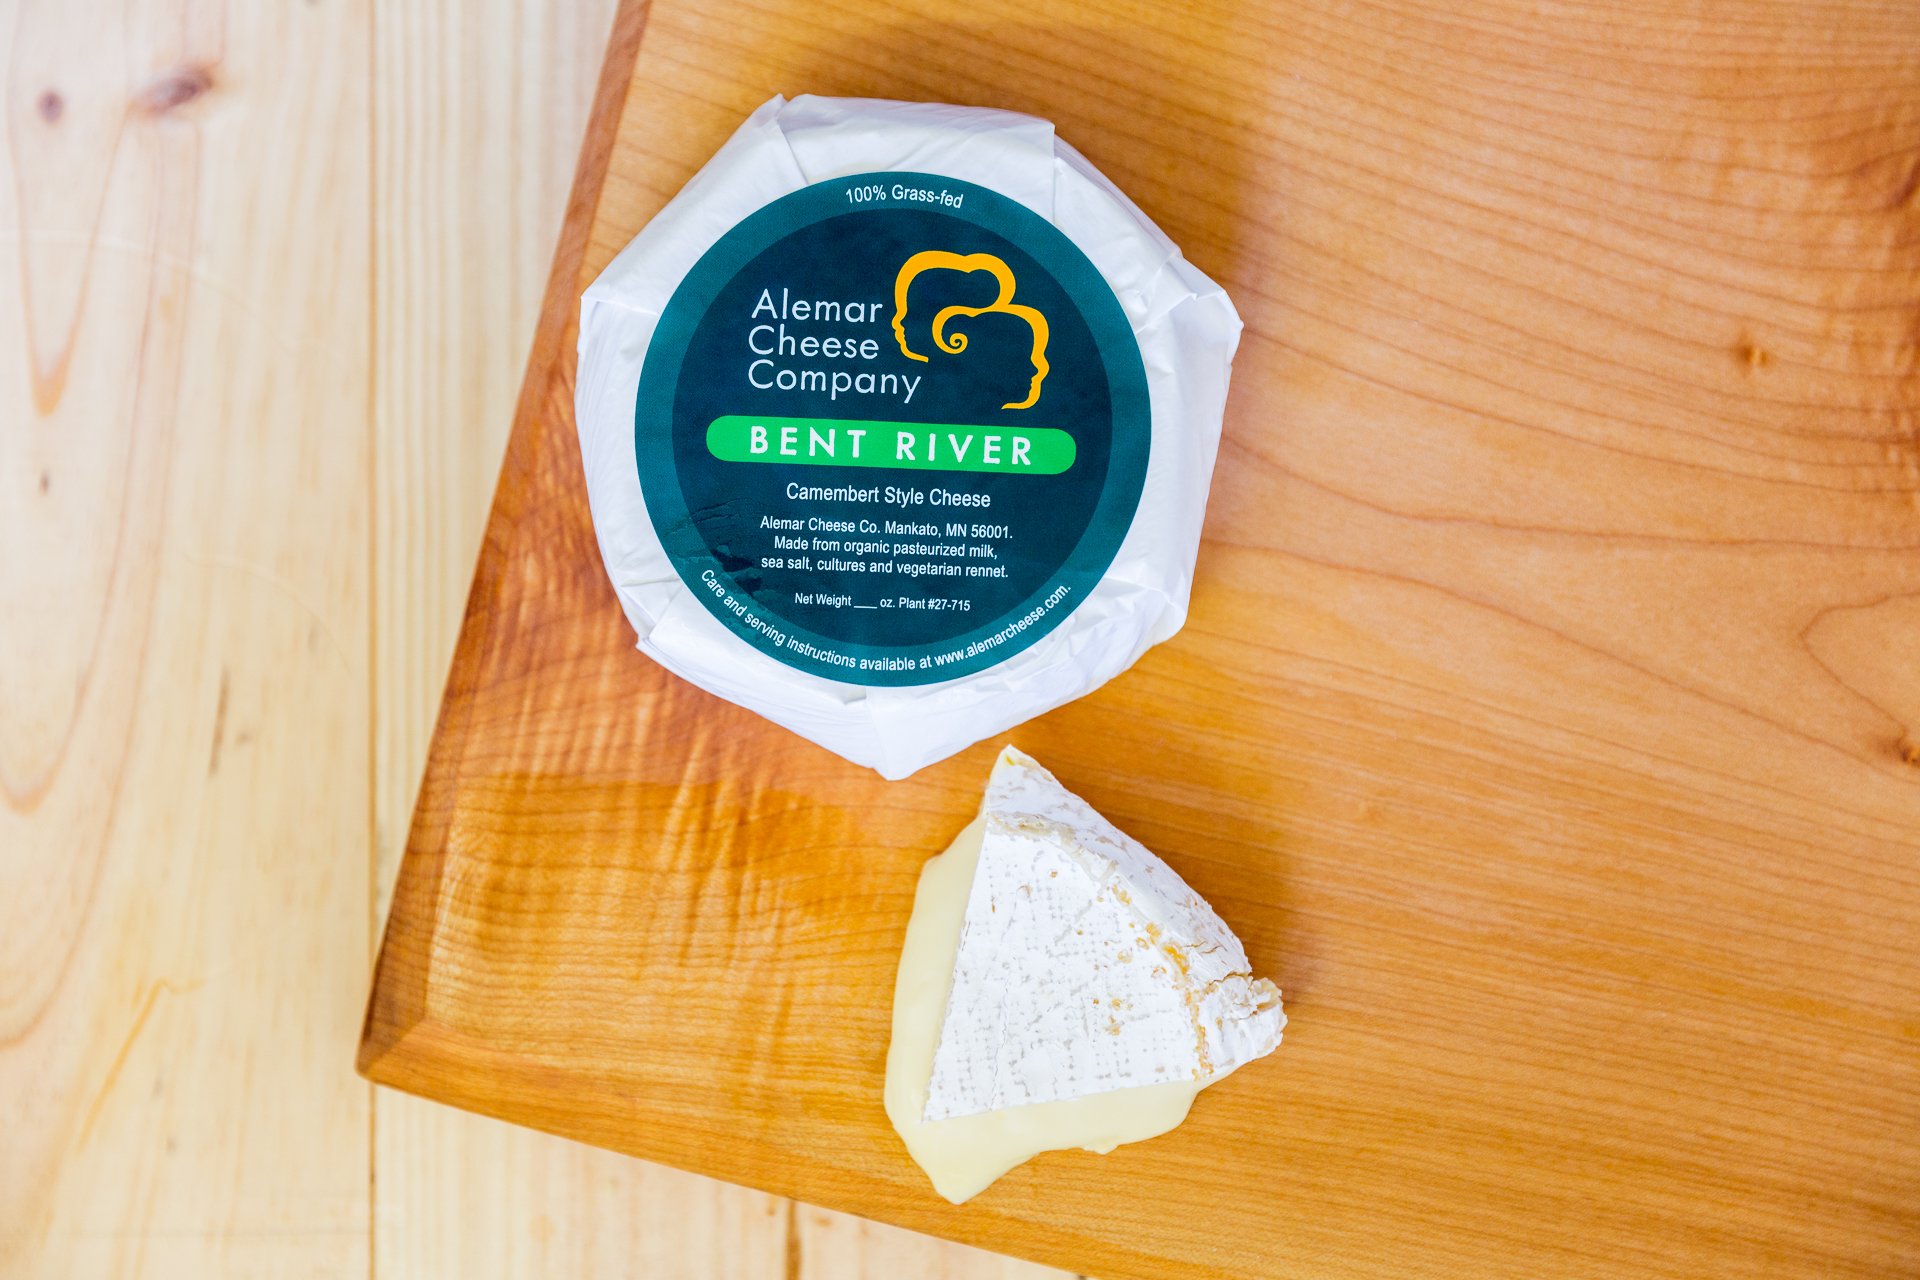 18_cream_and_the_crop_cheese_selections_alemar_cheese_company_bent_river.jpg